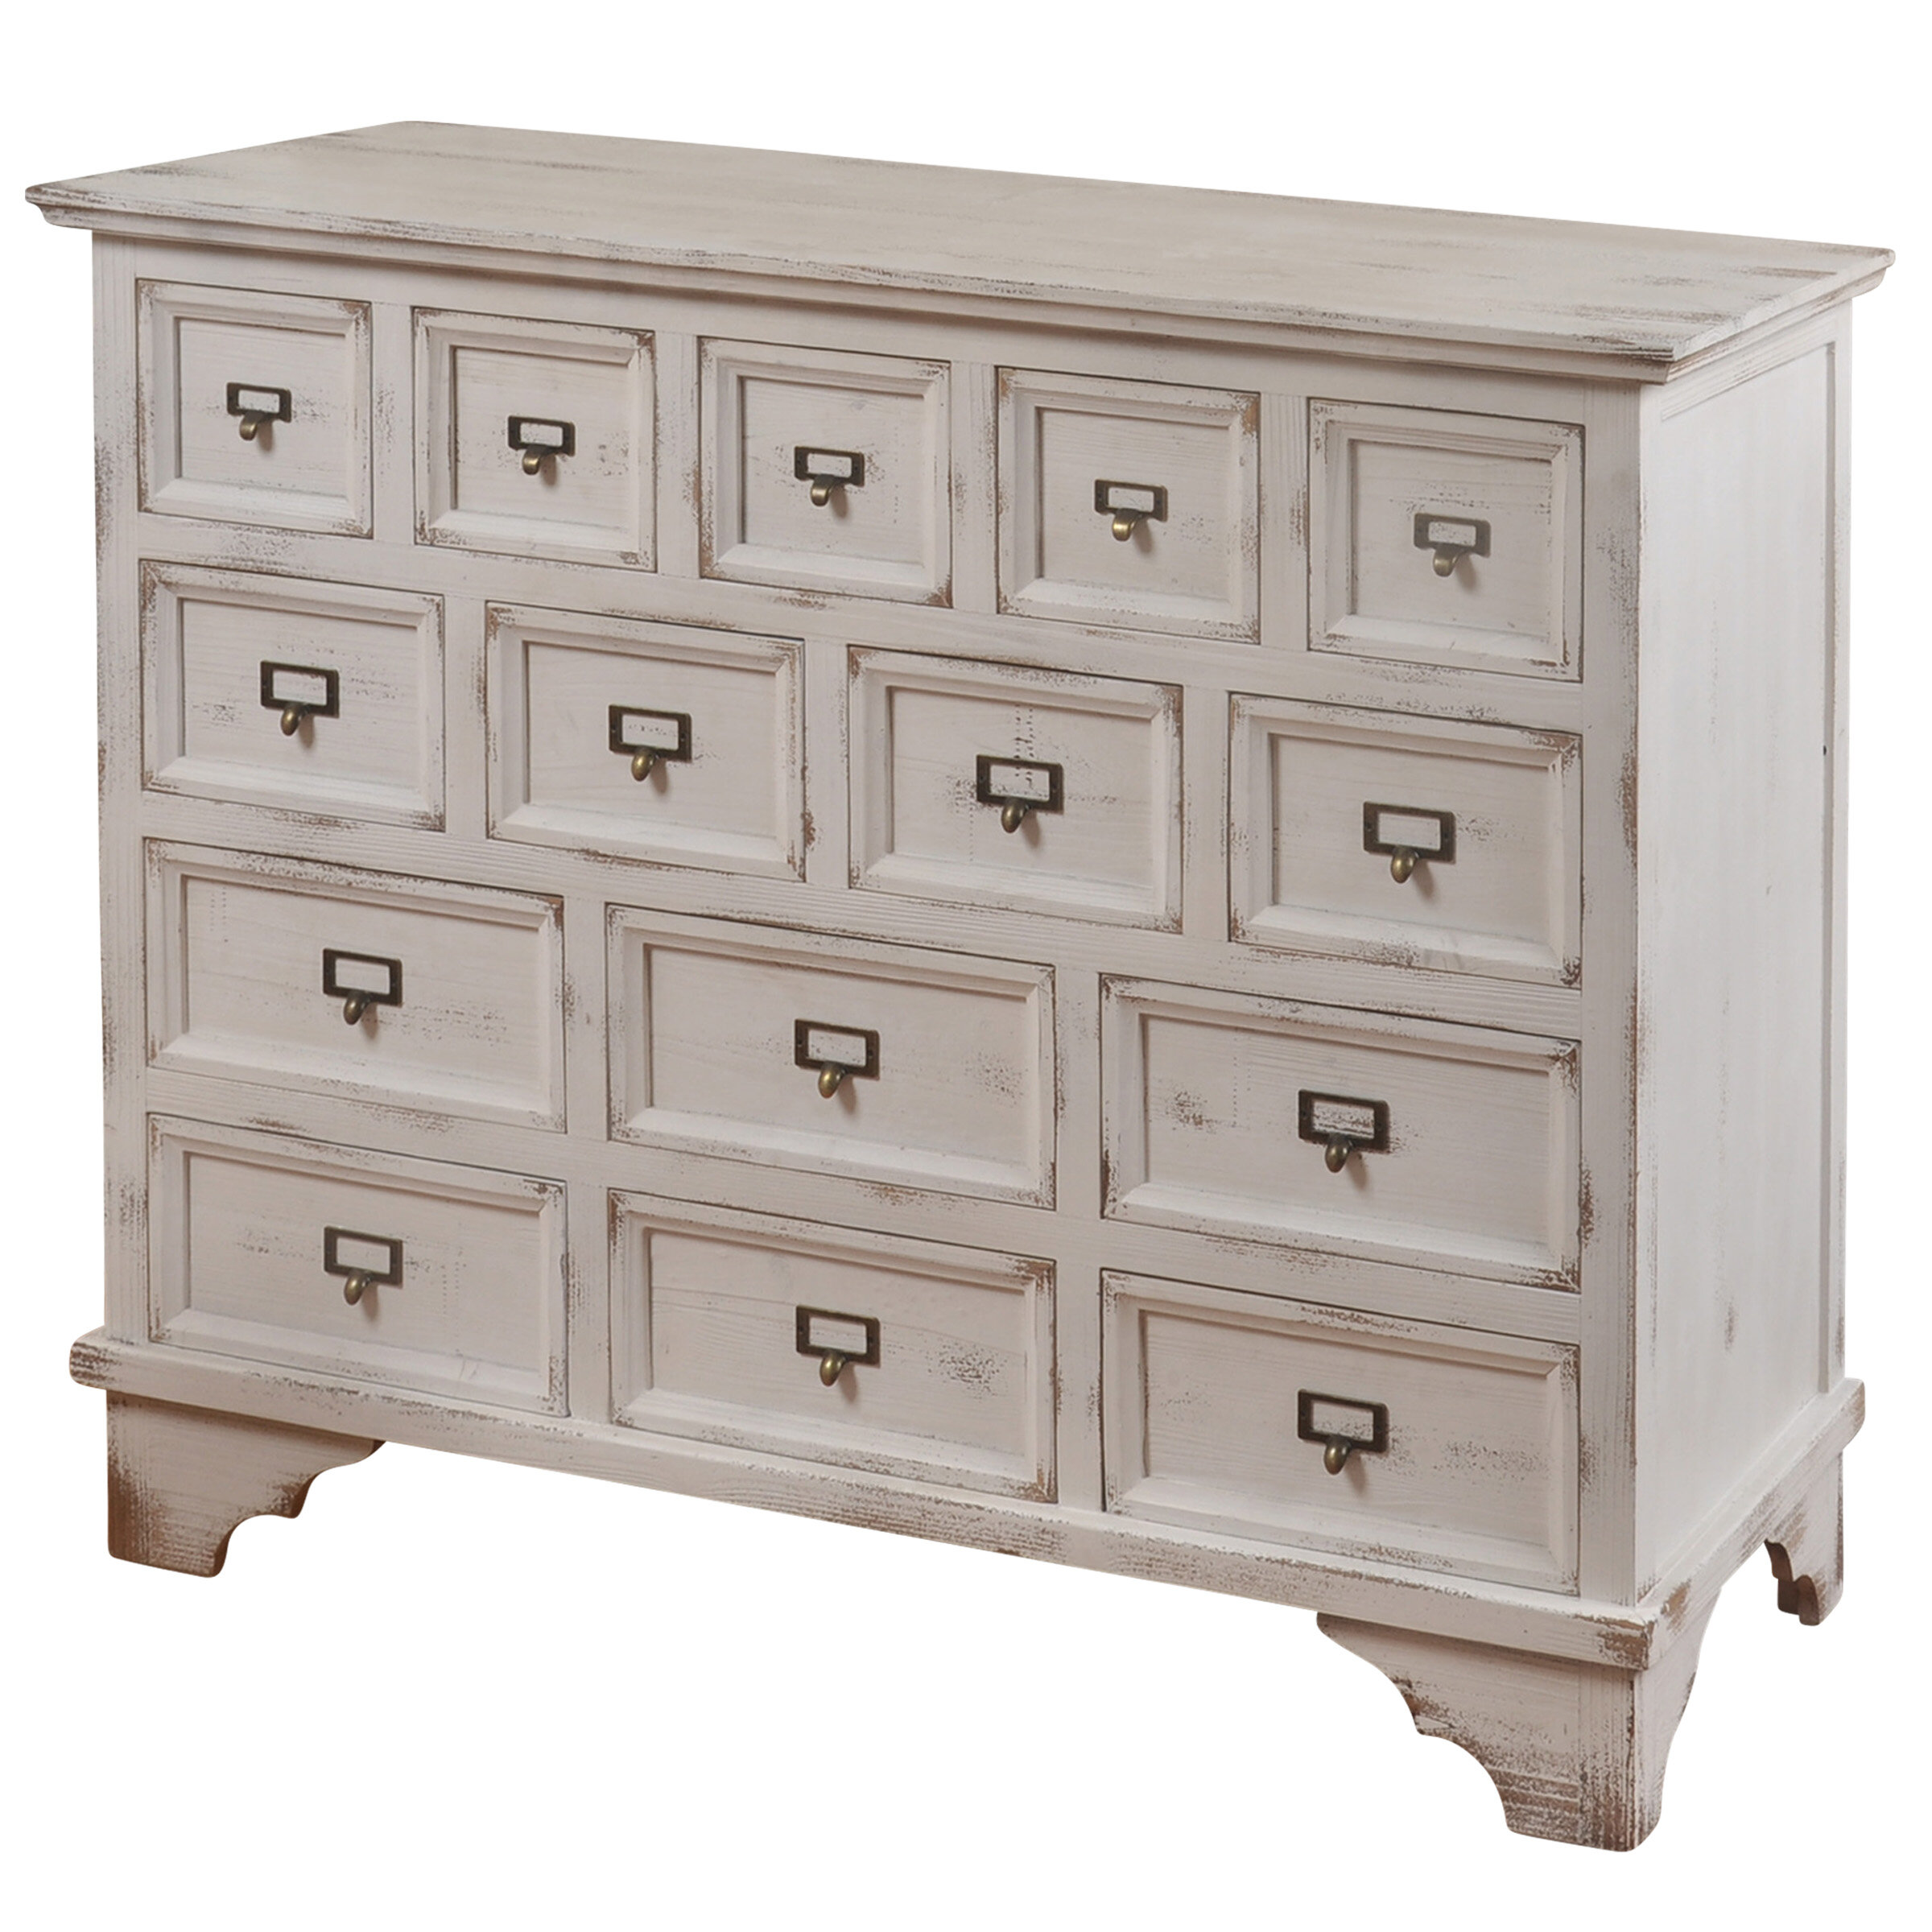 Shoshoni 15 Drawer Apothecary Accent Chest Reviews Joss Main